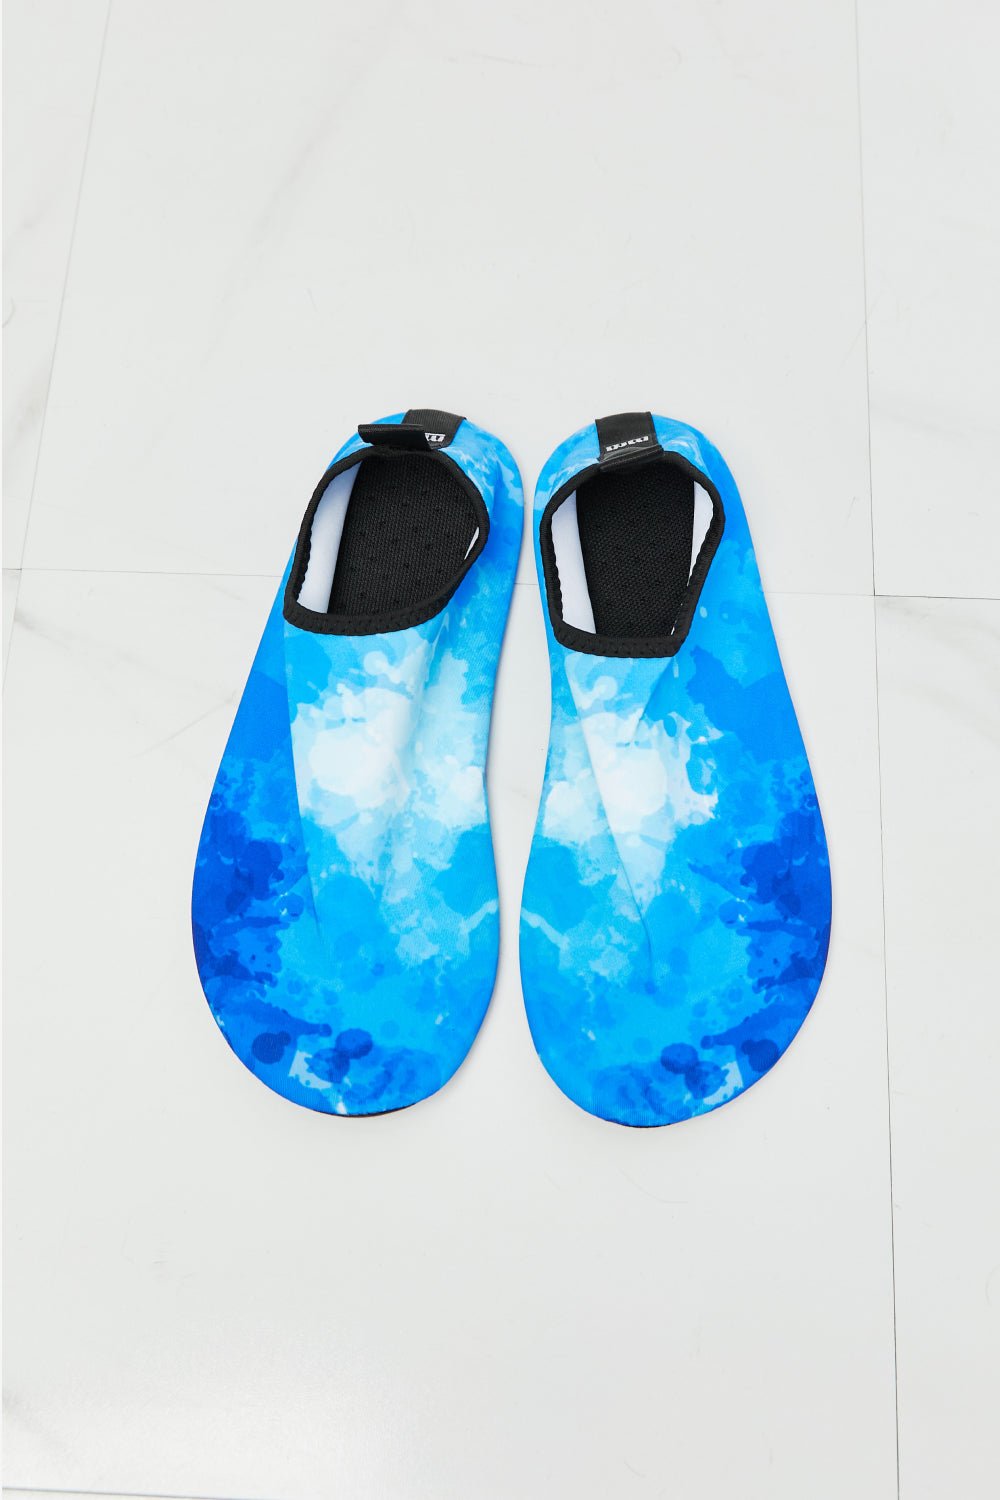 MMshoes On The Shore Water Shoes in Blue - Guy Christopher